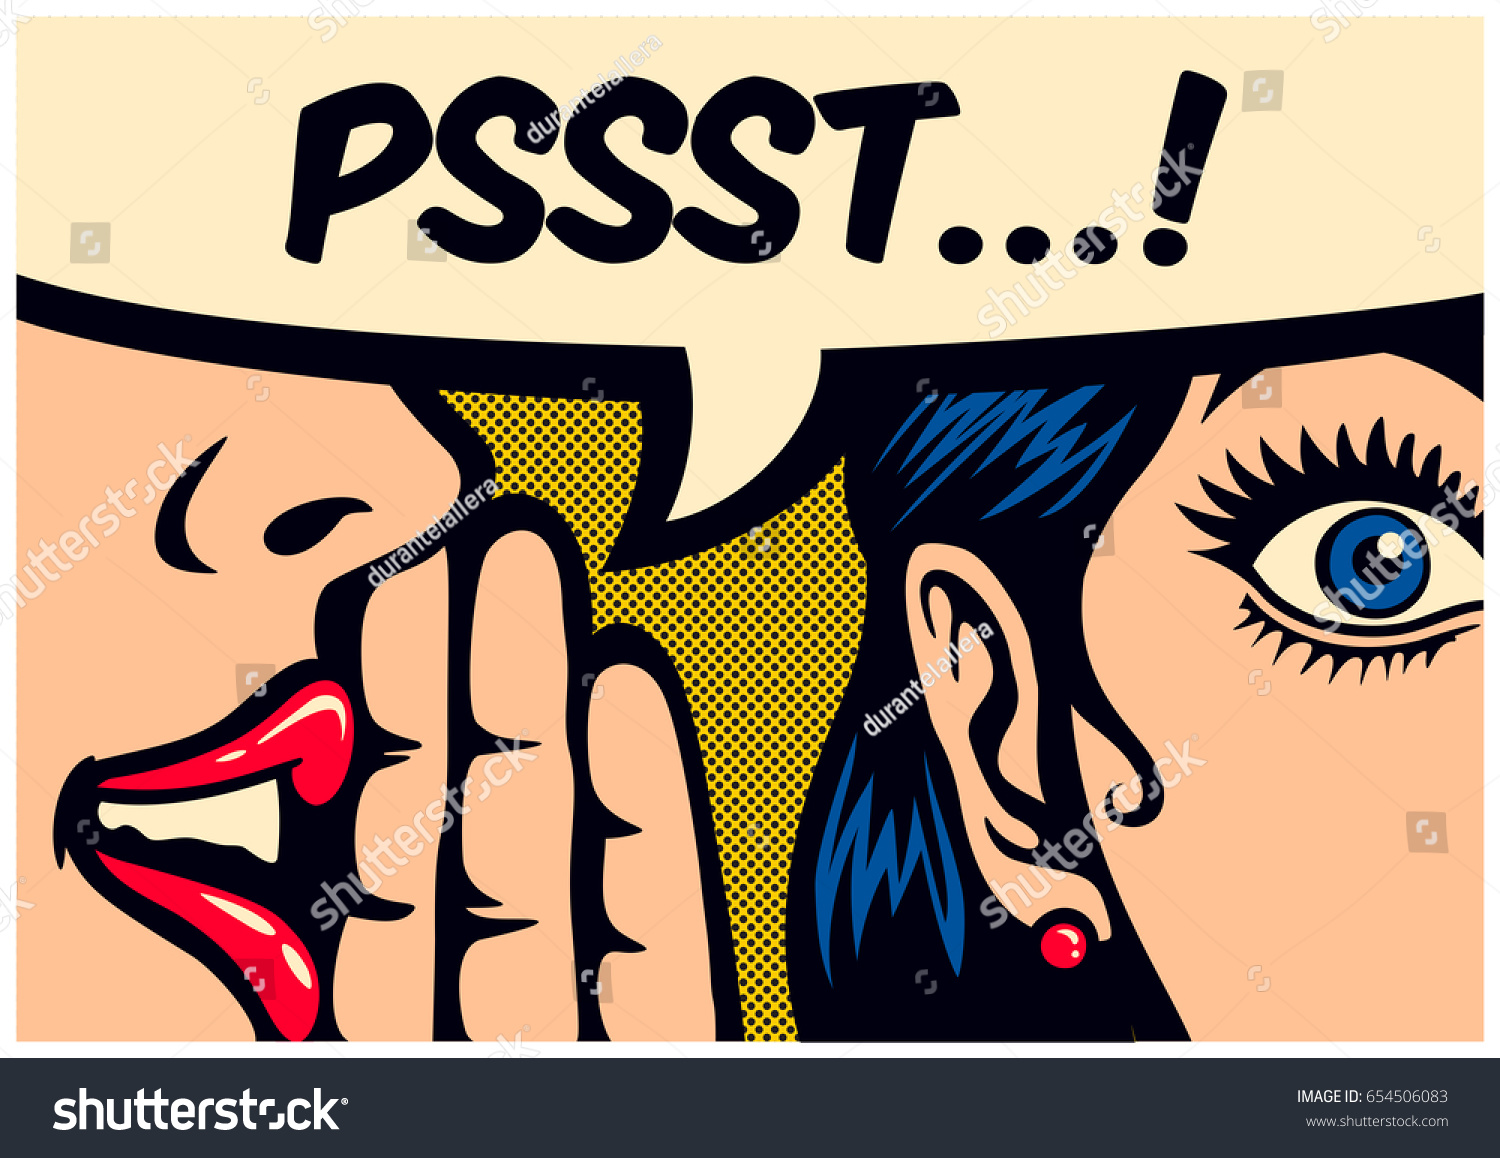 
Pop Art style comic book panel gossip girl whispering in ear secrets with speech bubble, rumor, word-of-mouth concept vector illustration #654506083